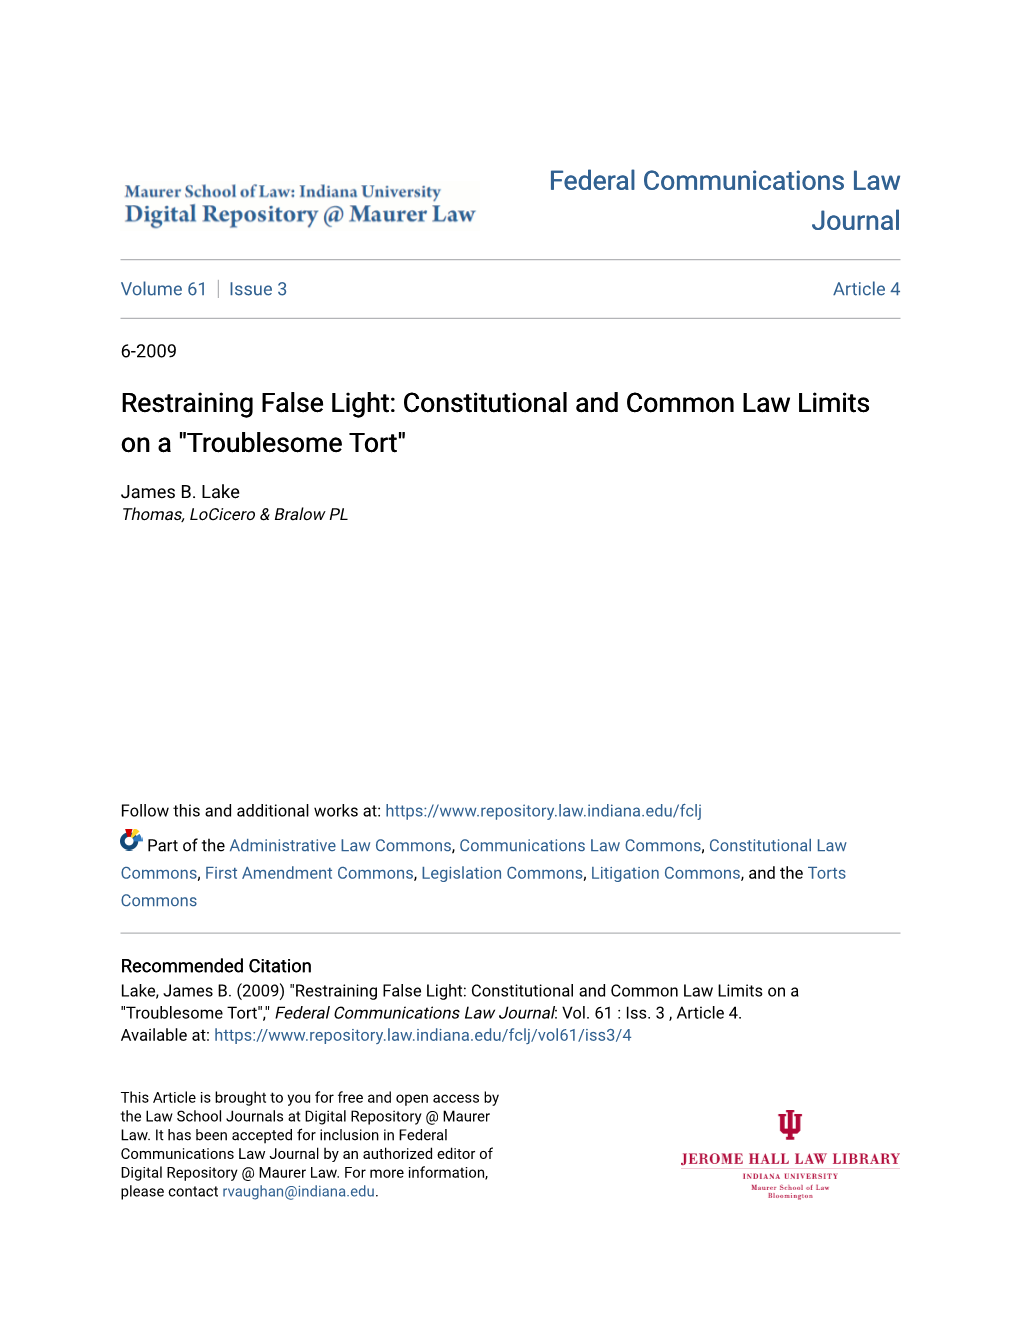 Restraining False Light: Constitutional and Common Law Limits on a "Troublesome Tort"